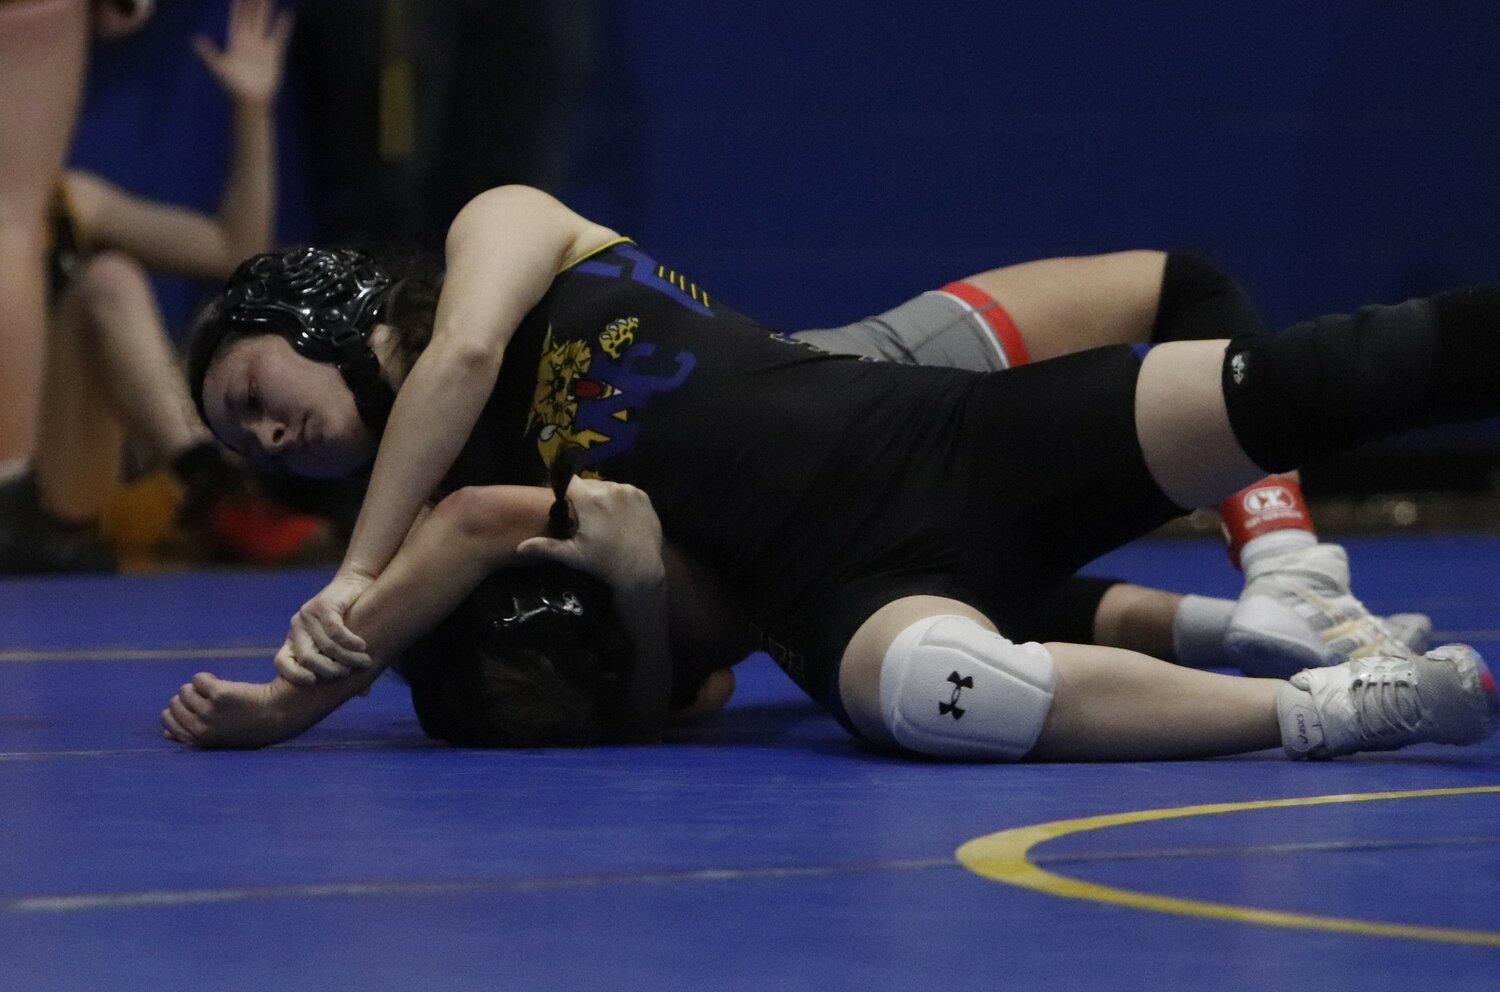 Wright City senior Samantha Yates pins Lilly Debo of Mexico to the mat during her final match of Saturday’s Wright City Tournament. Yates went 5-0 to win the 115-pound weight class.